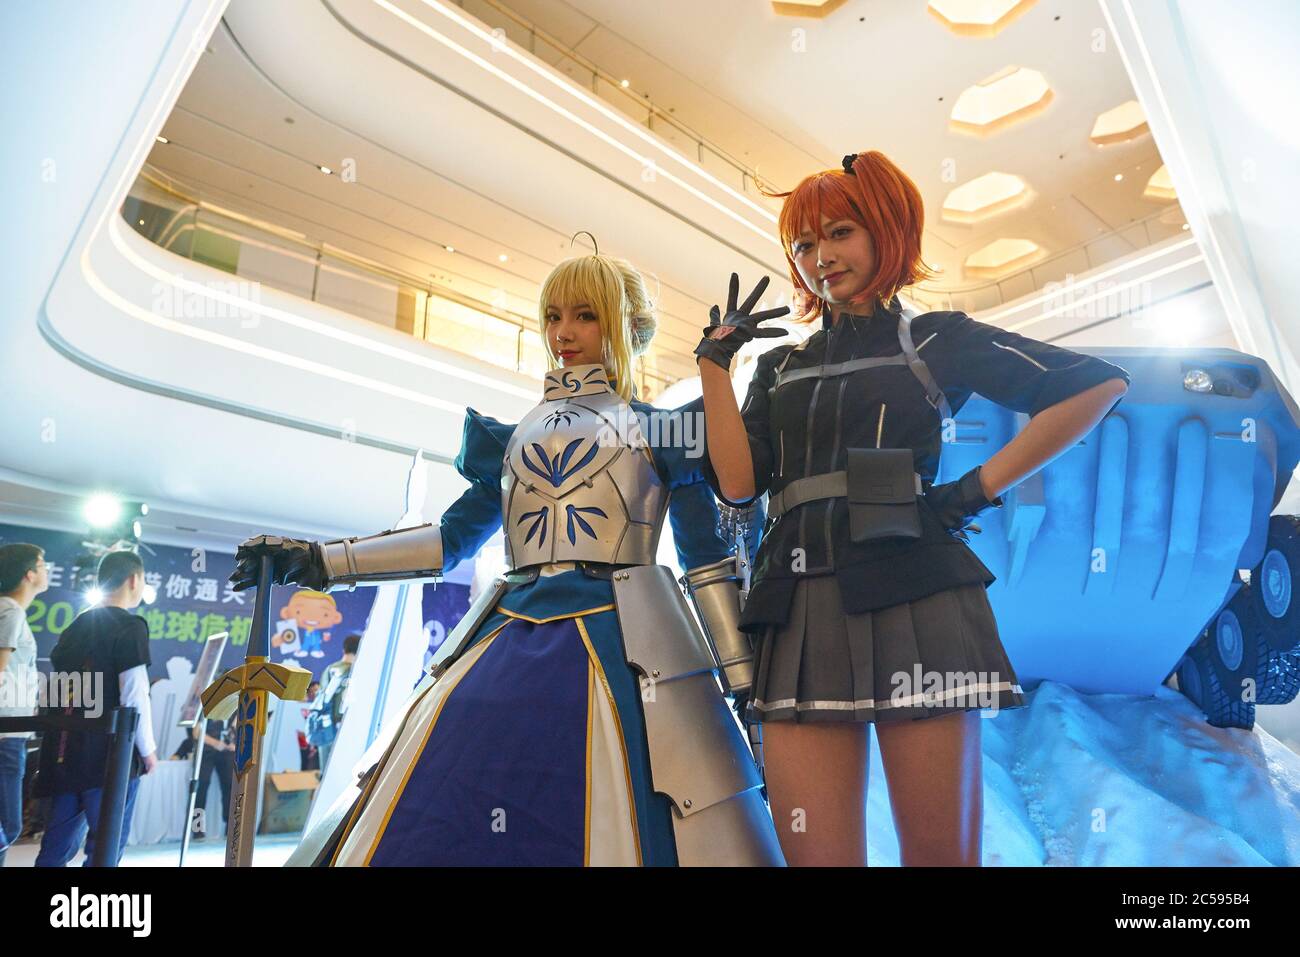 SHENZHEN, CHINA - APRIL 20, 2019: cosplay of the Fate/Grand Order "Saber"  and "Ritsuka Fujimaru" characters at Sony Expo 2019 in Shenzhen, China  Stock Photo - Alamy